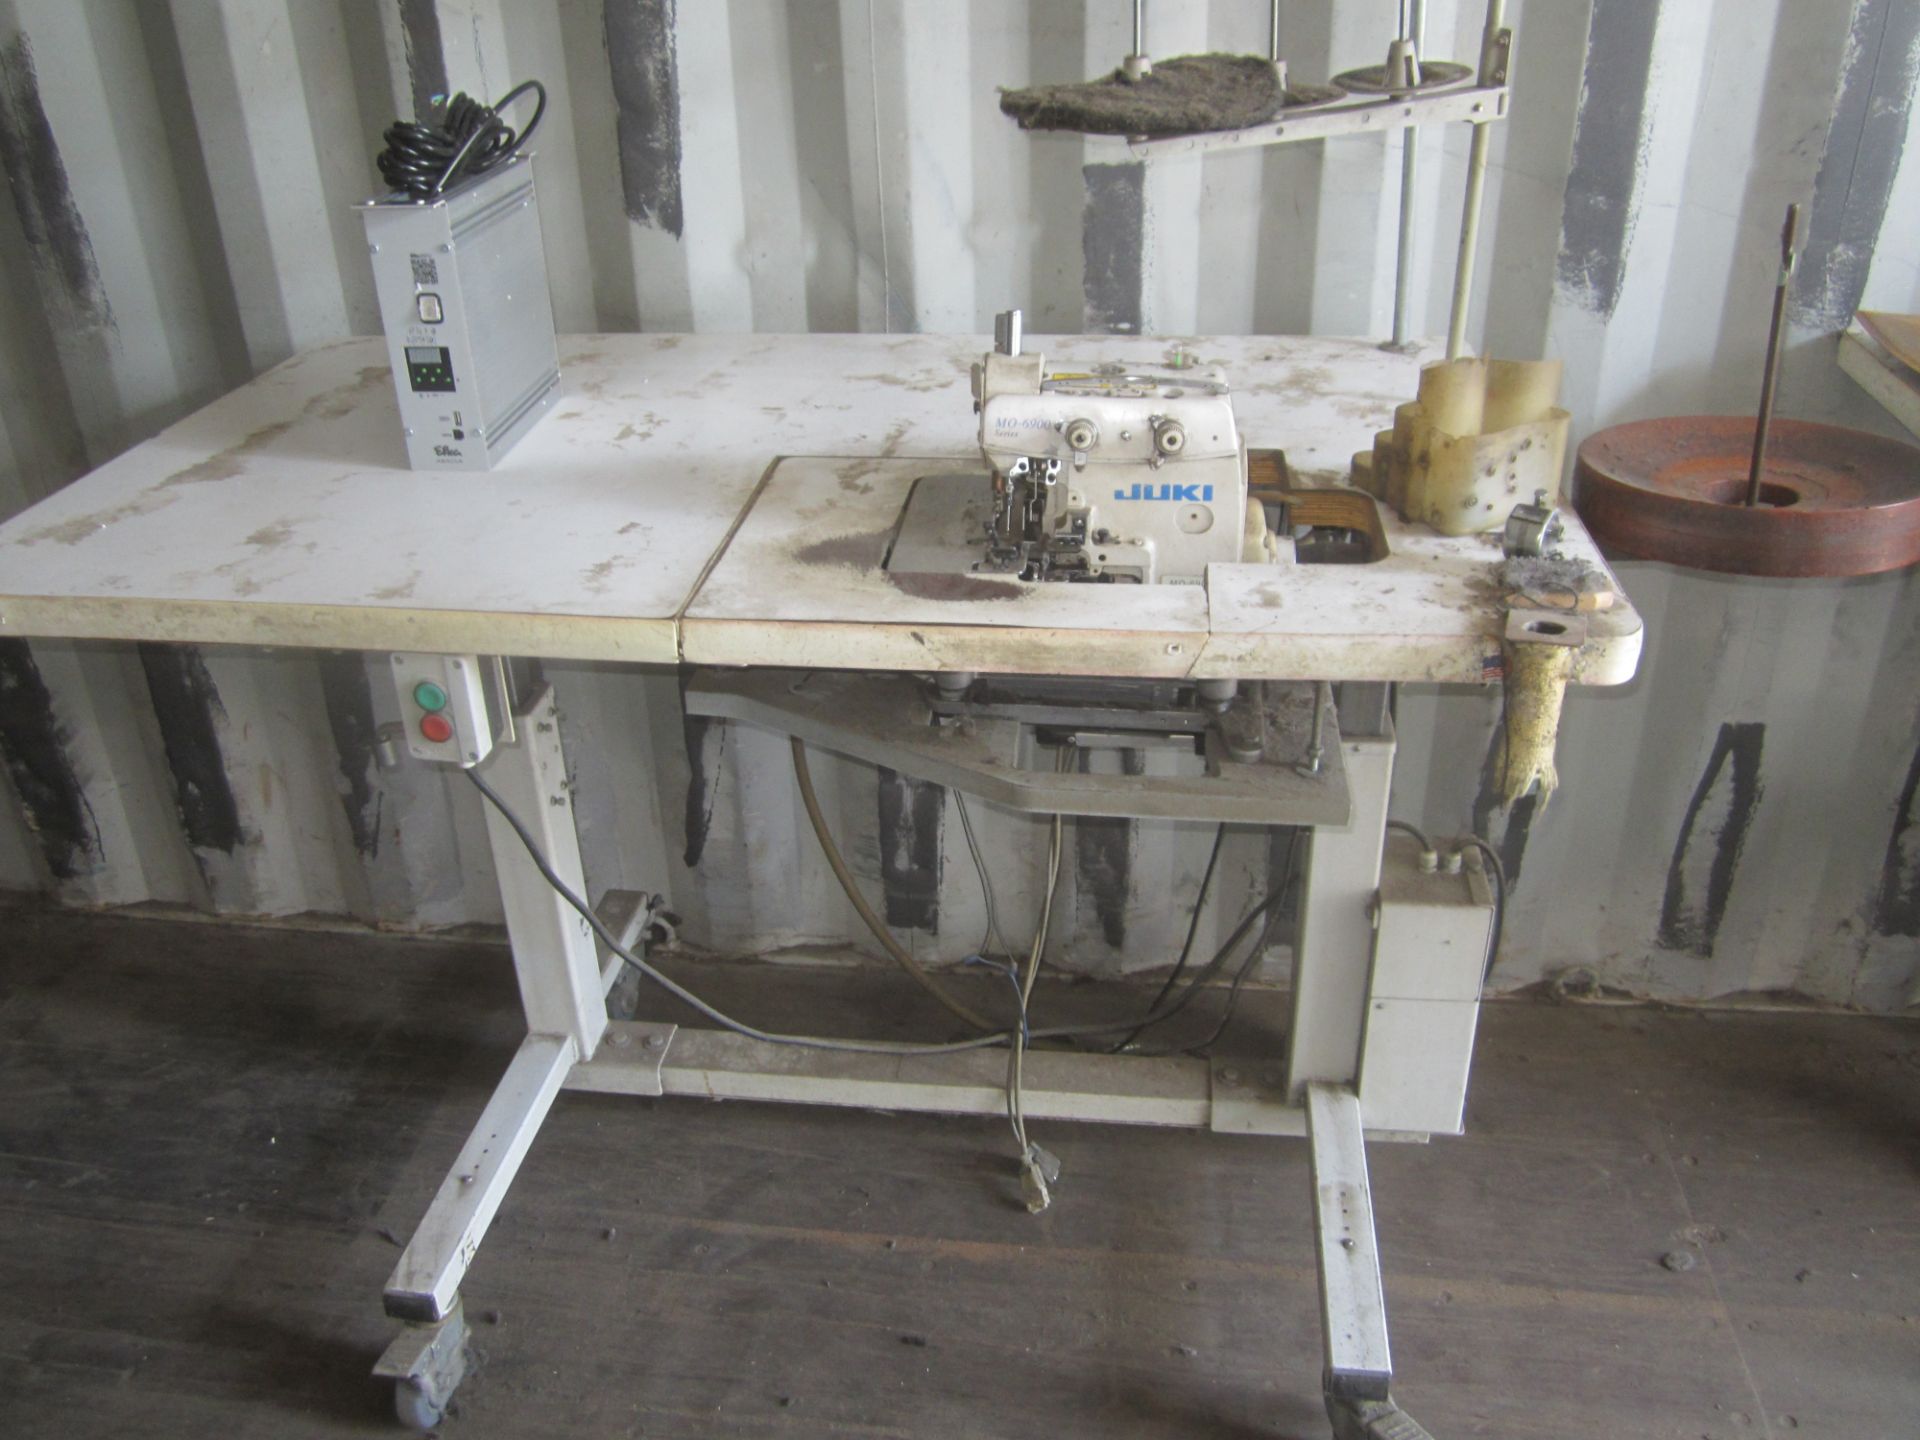 Juki Model MO-6905G Class OM6-700 Industrial Sewing Machine, s/n 8MOED31130, with Elka Electronic